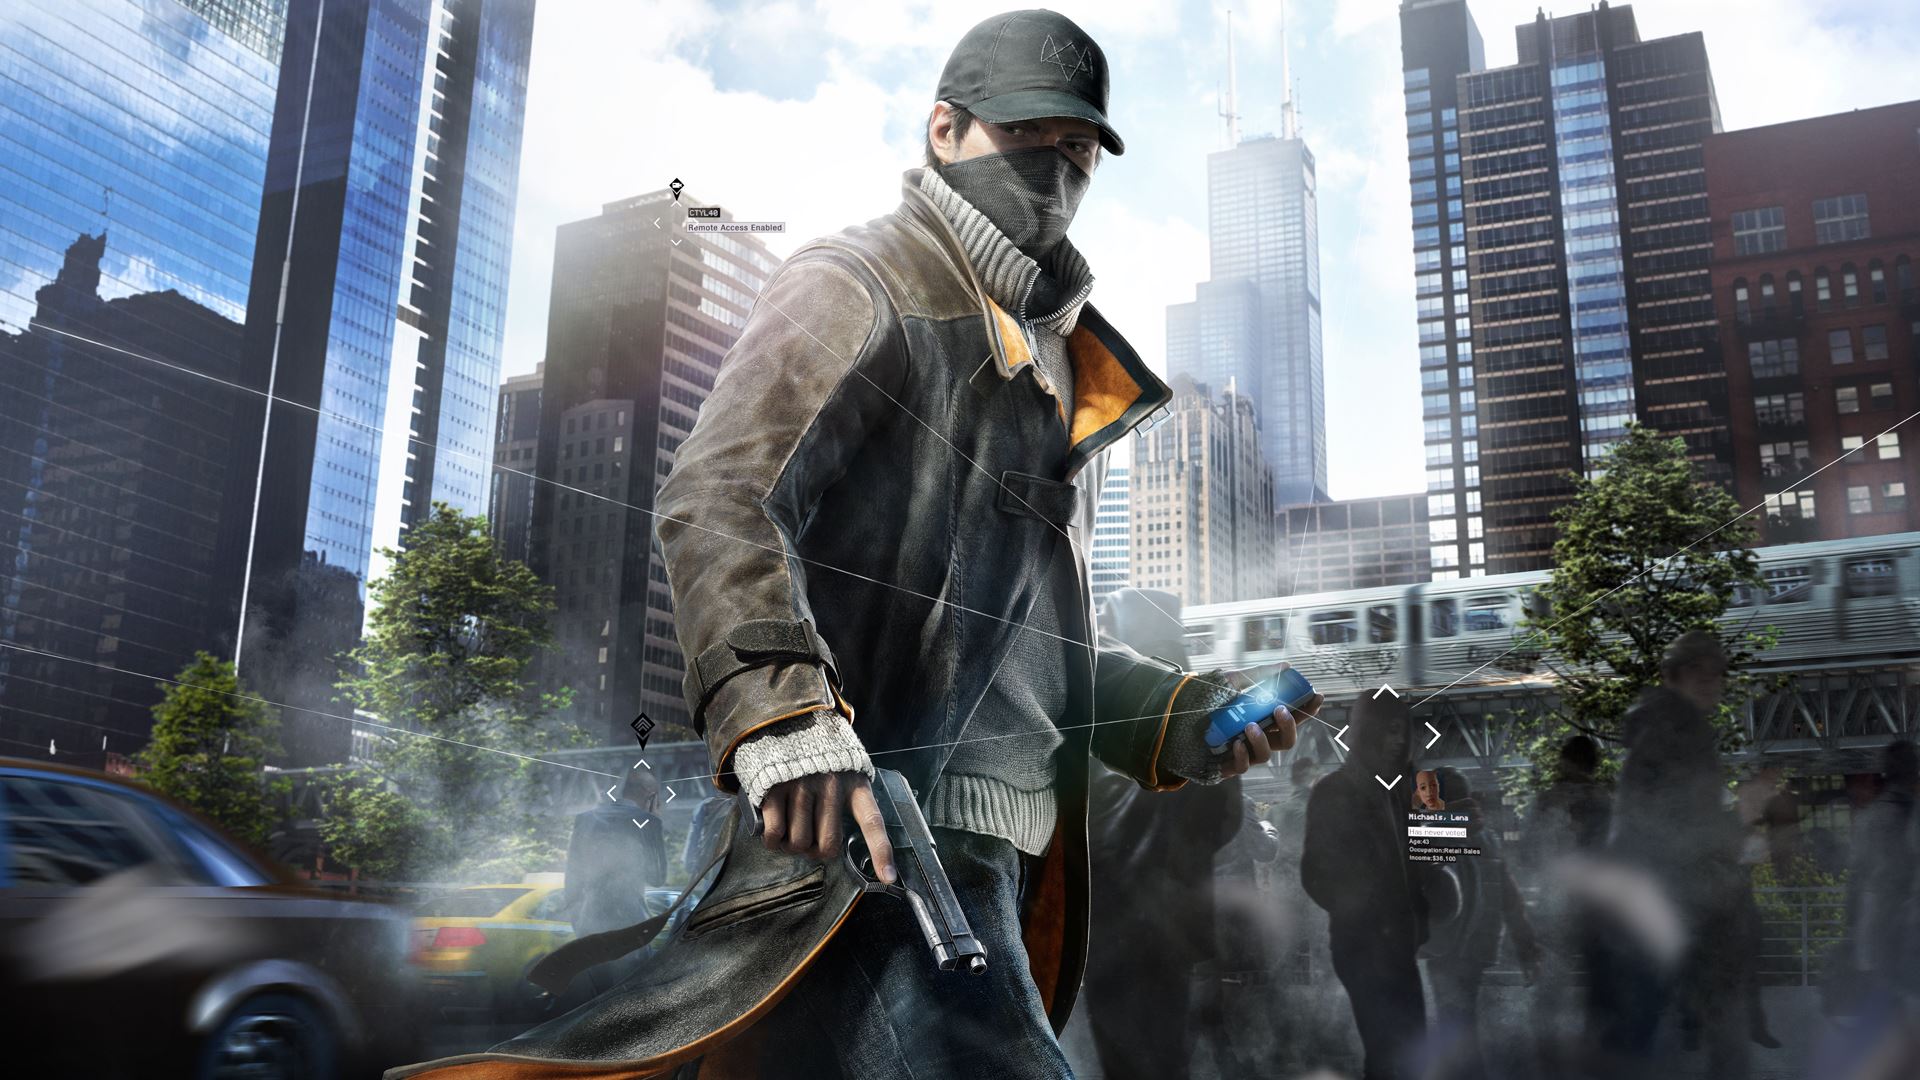 General 1920x1080 Aiden Pearce hacking Watch_Dogs gun Chicago video games digital art video game art weapon science fiction video game men